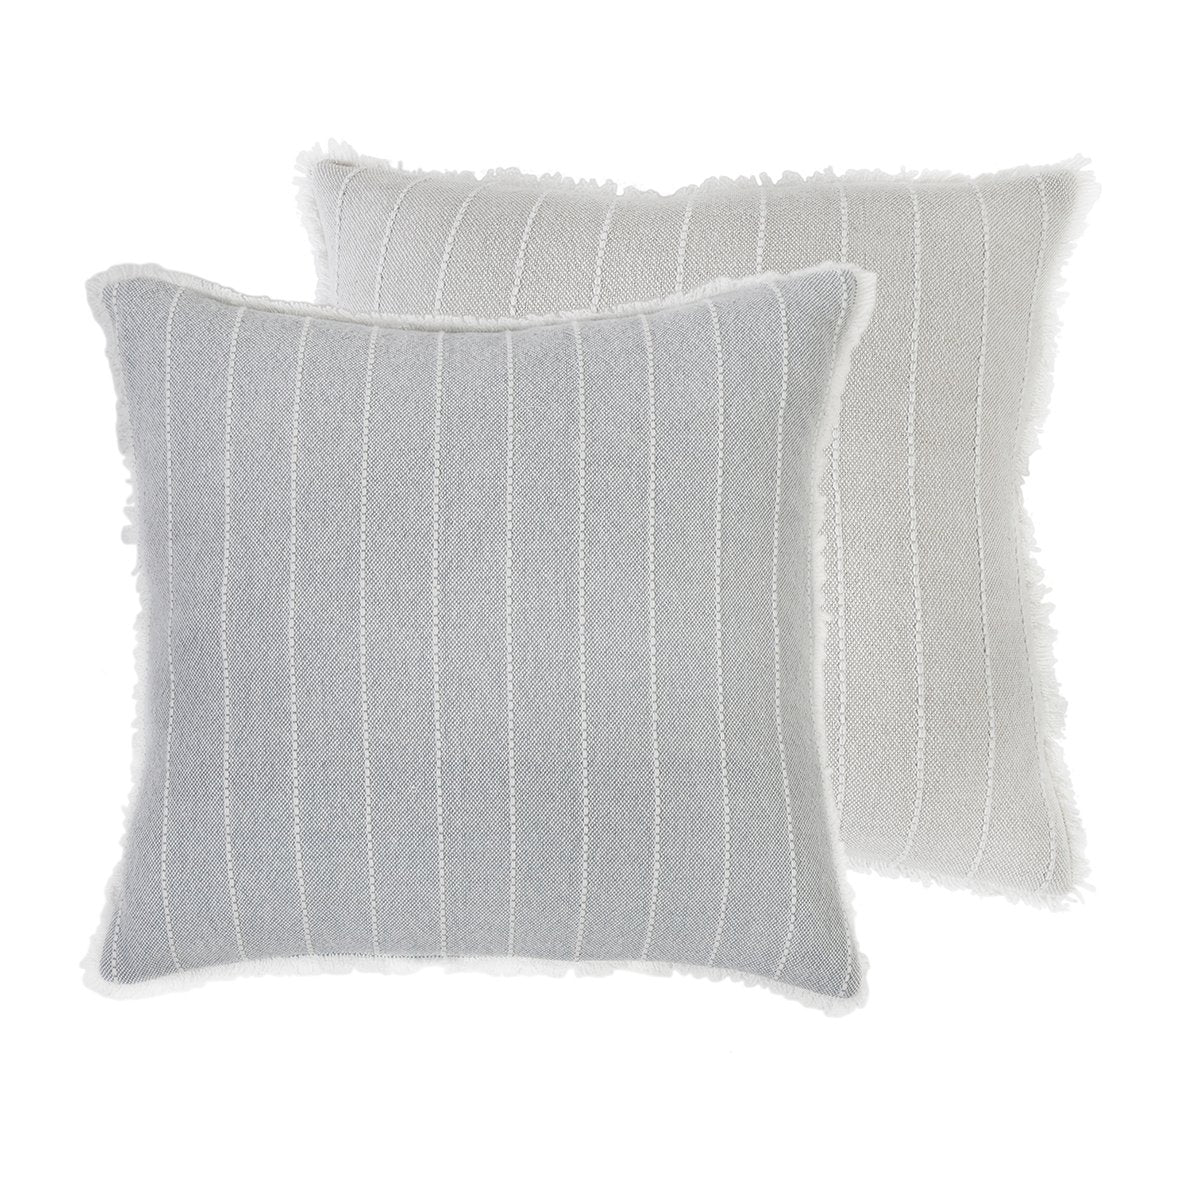 HENLEY HAND WOVEN PILLOW 20" X 20" WITH INSERT - 2 colors-Pom Pom at Home